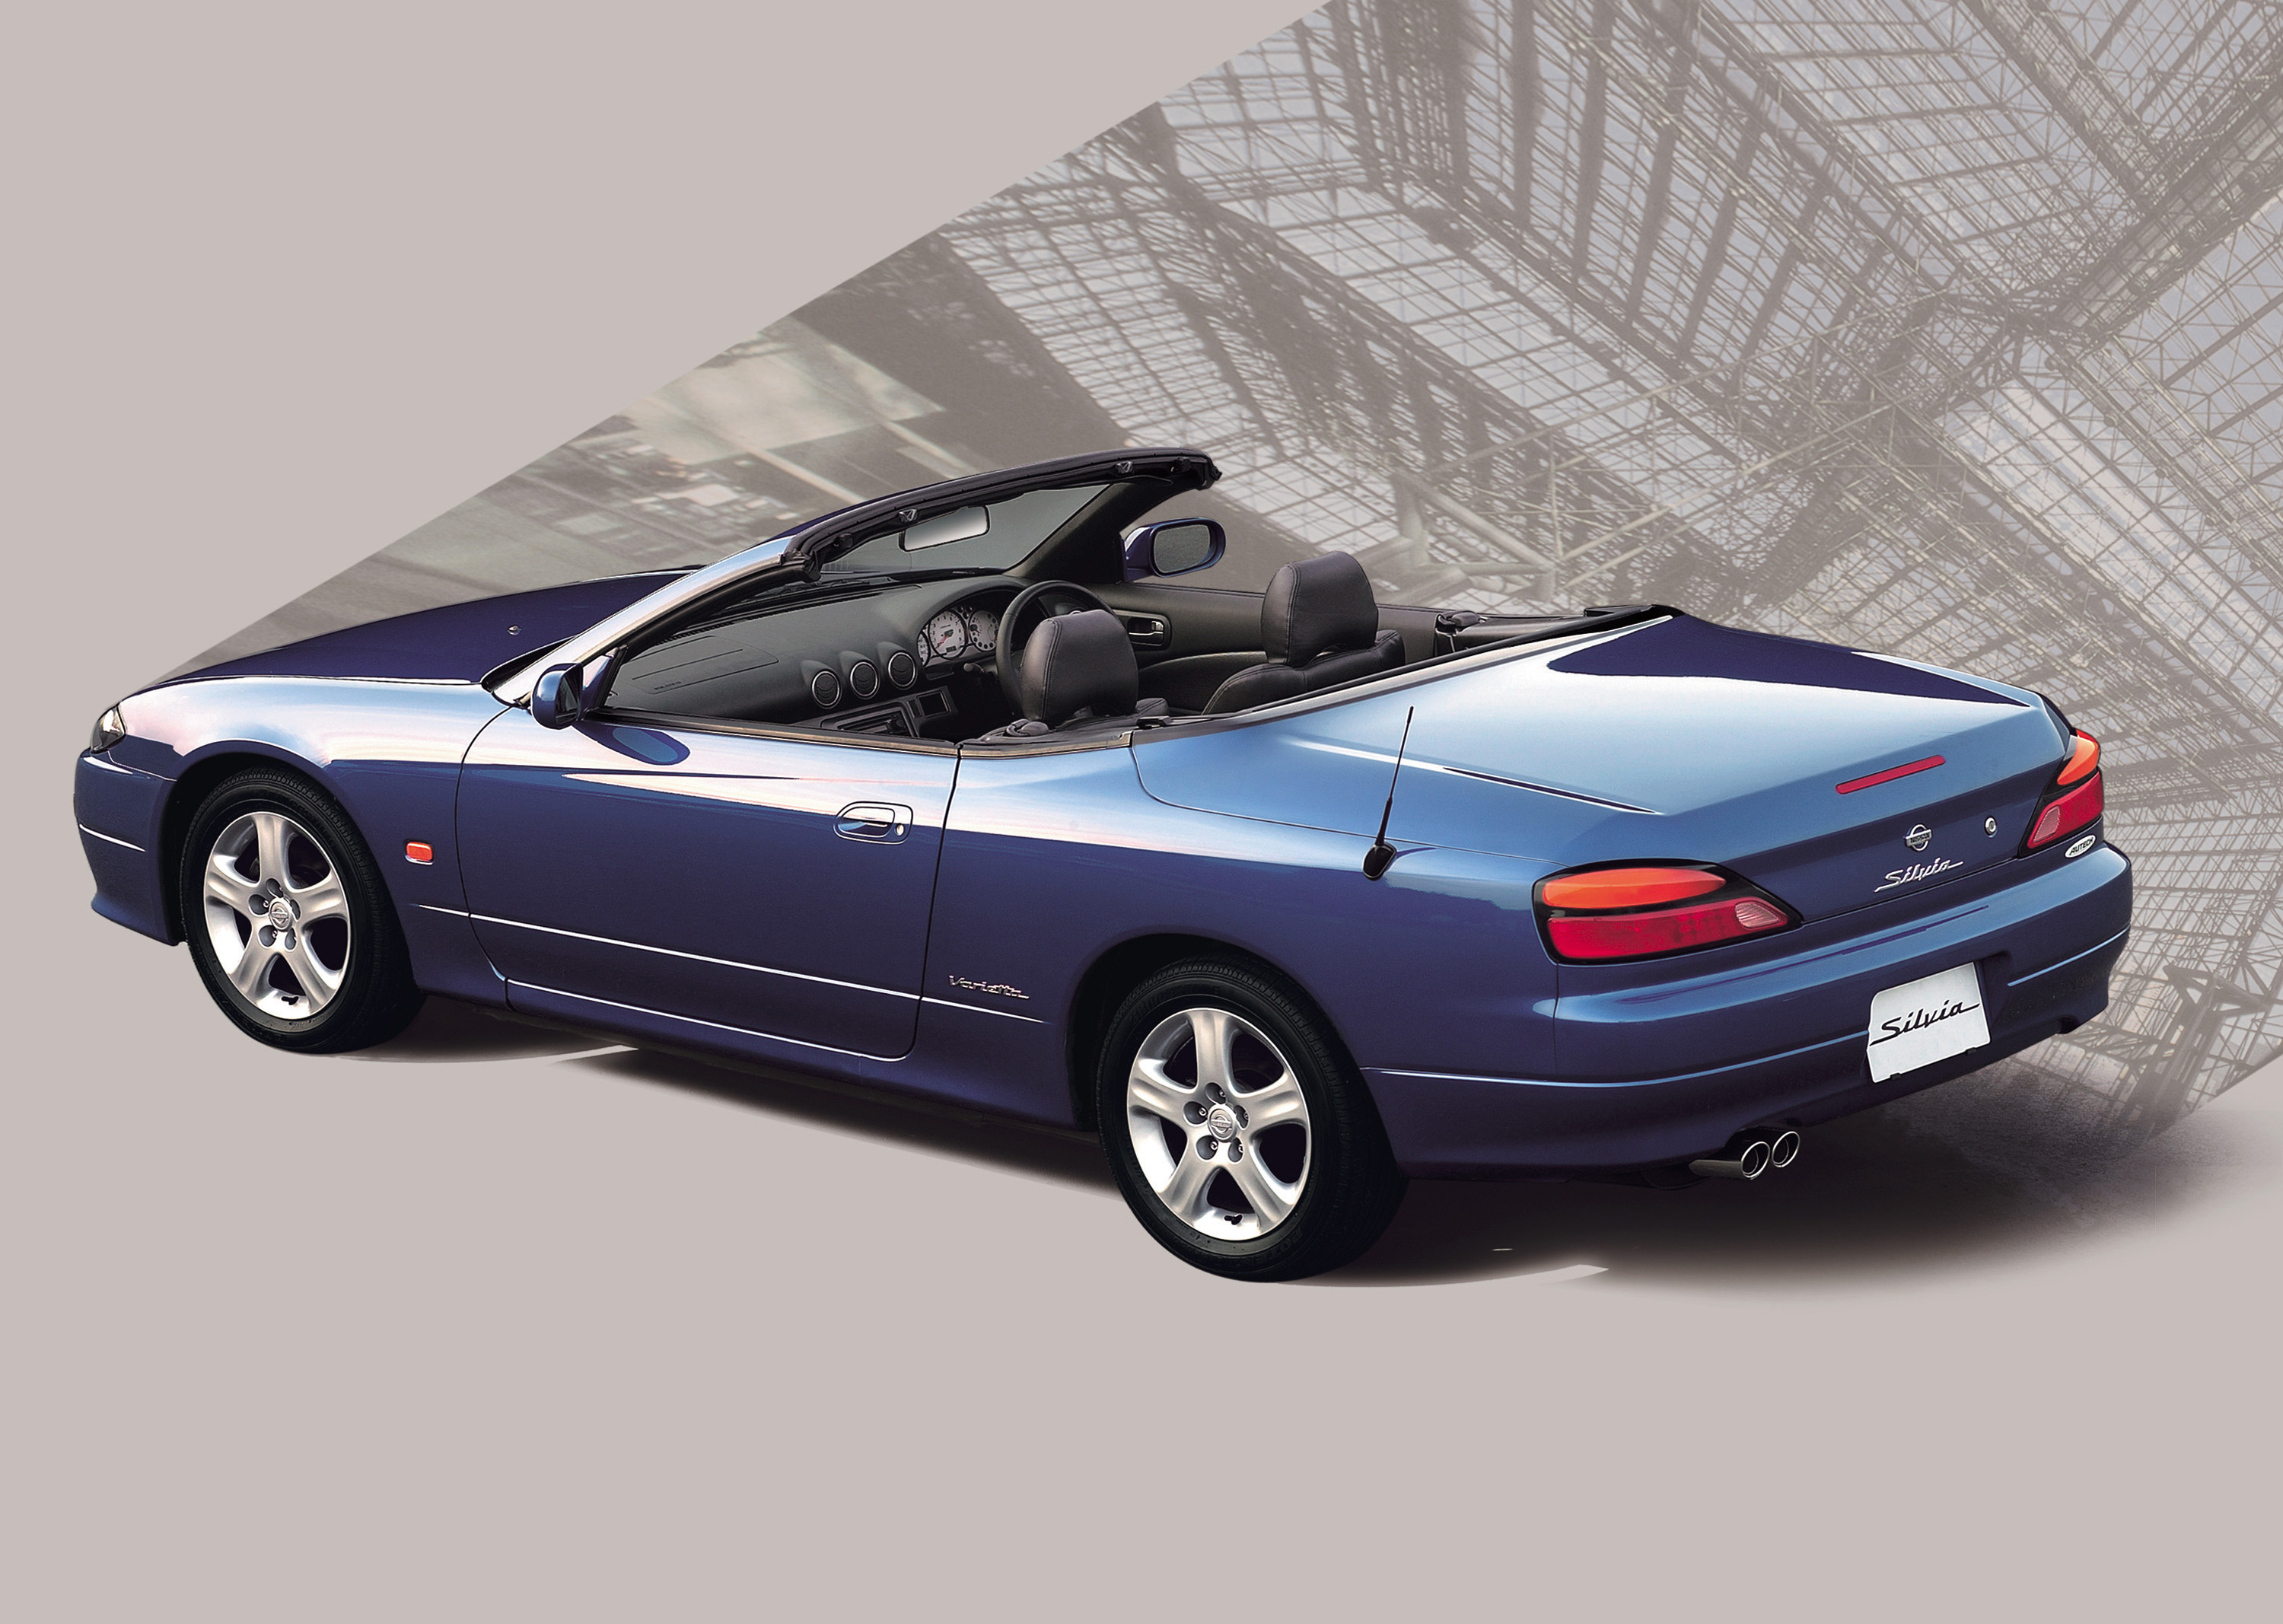 General 3000x2134 car convertible Nissan Nissan Silvia S15 Nissan Silvia cabriolet simple background cabrio vehicle blue cars sports car high angle Japanese cars